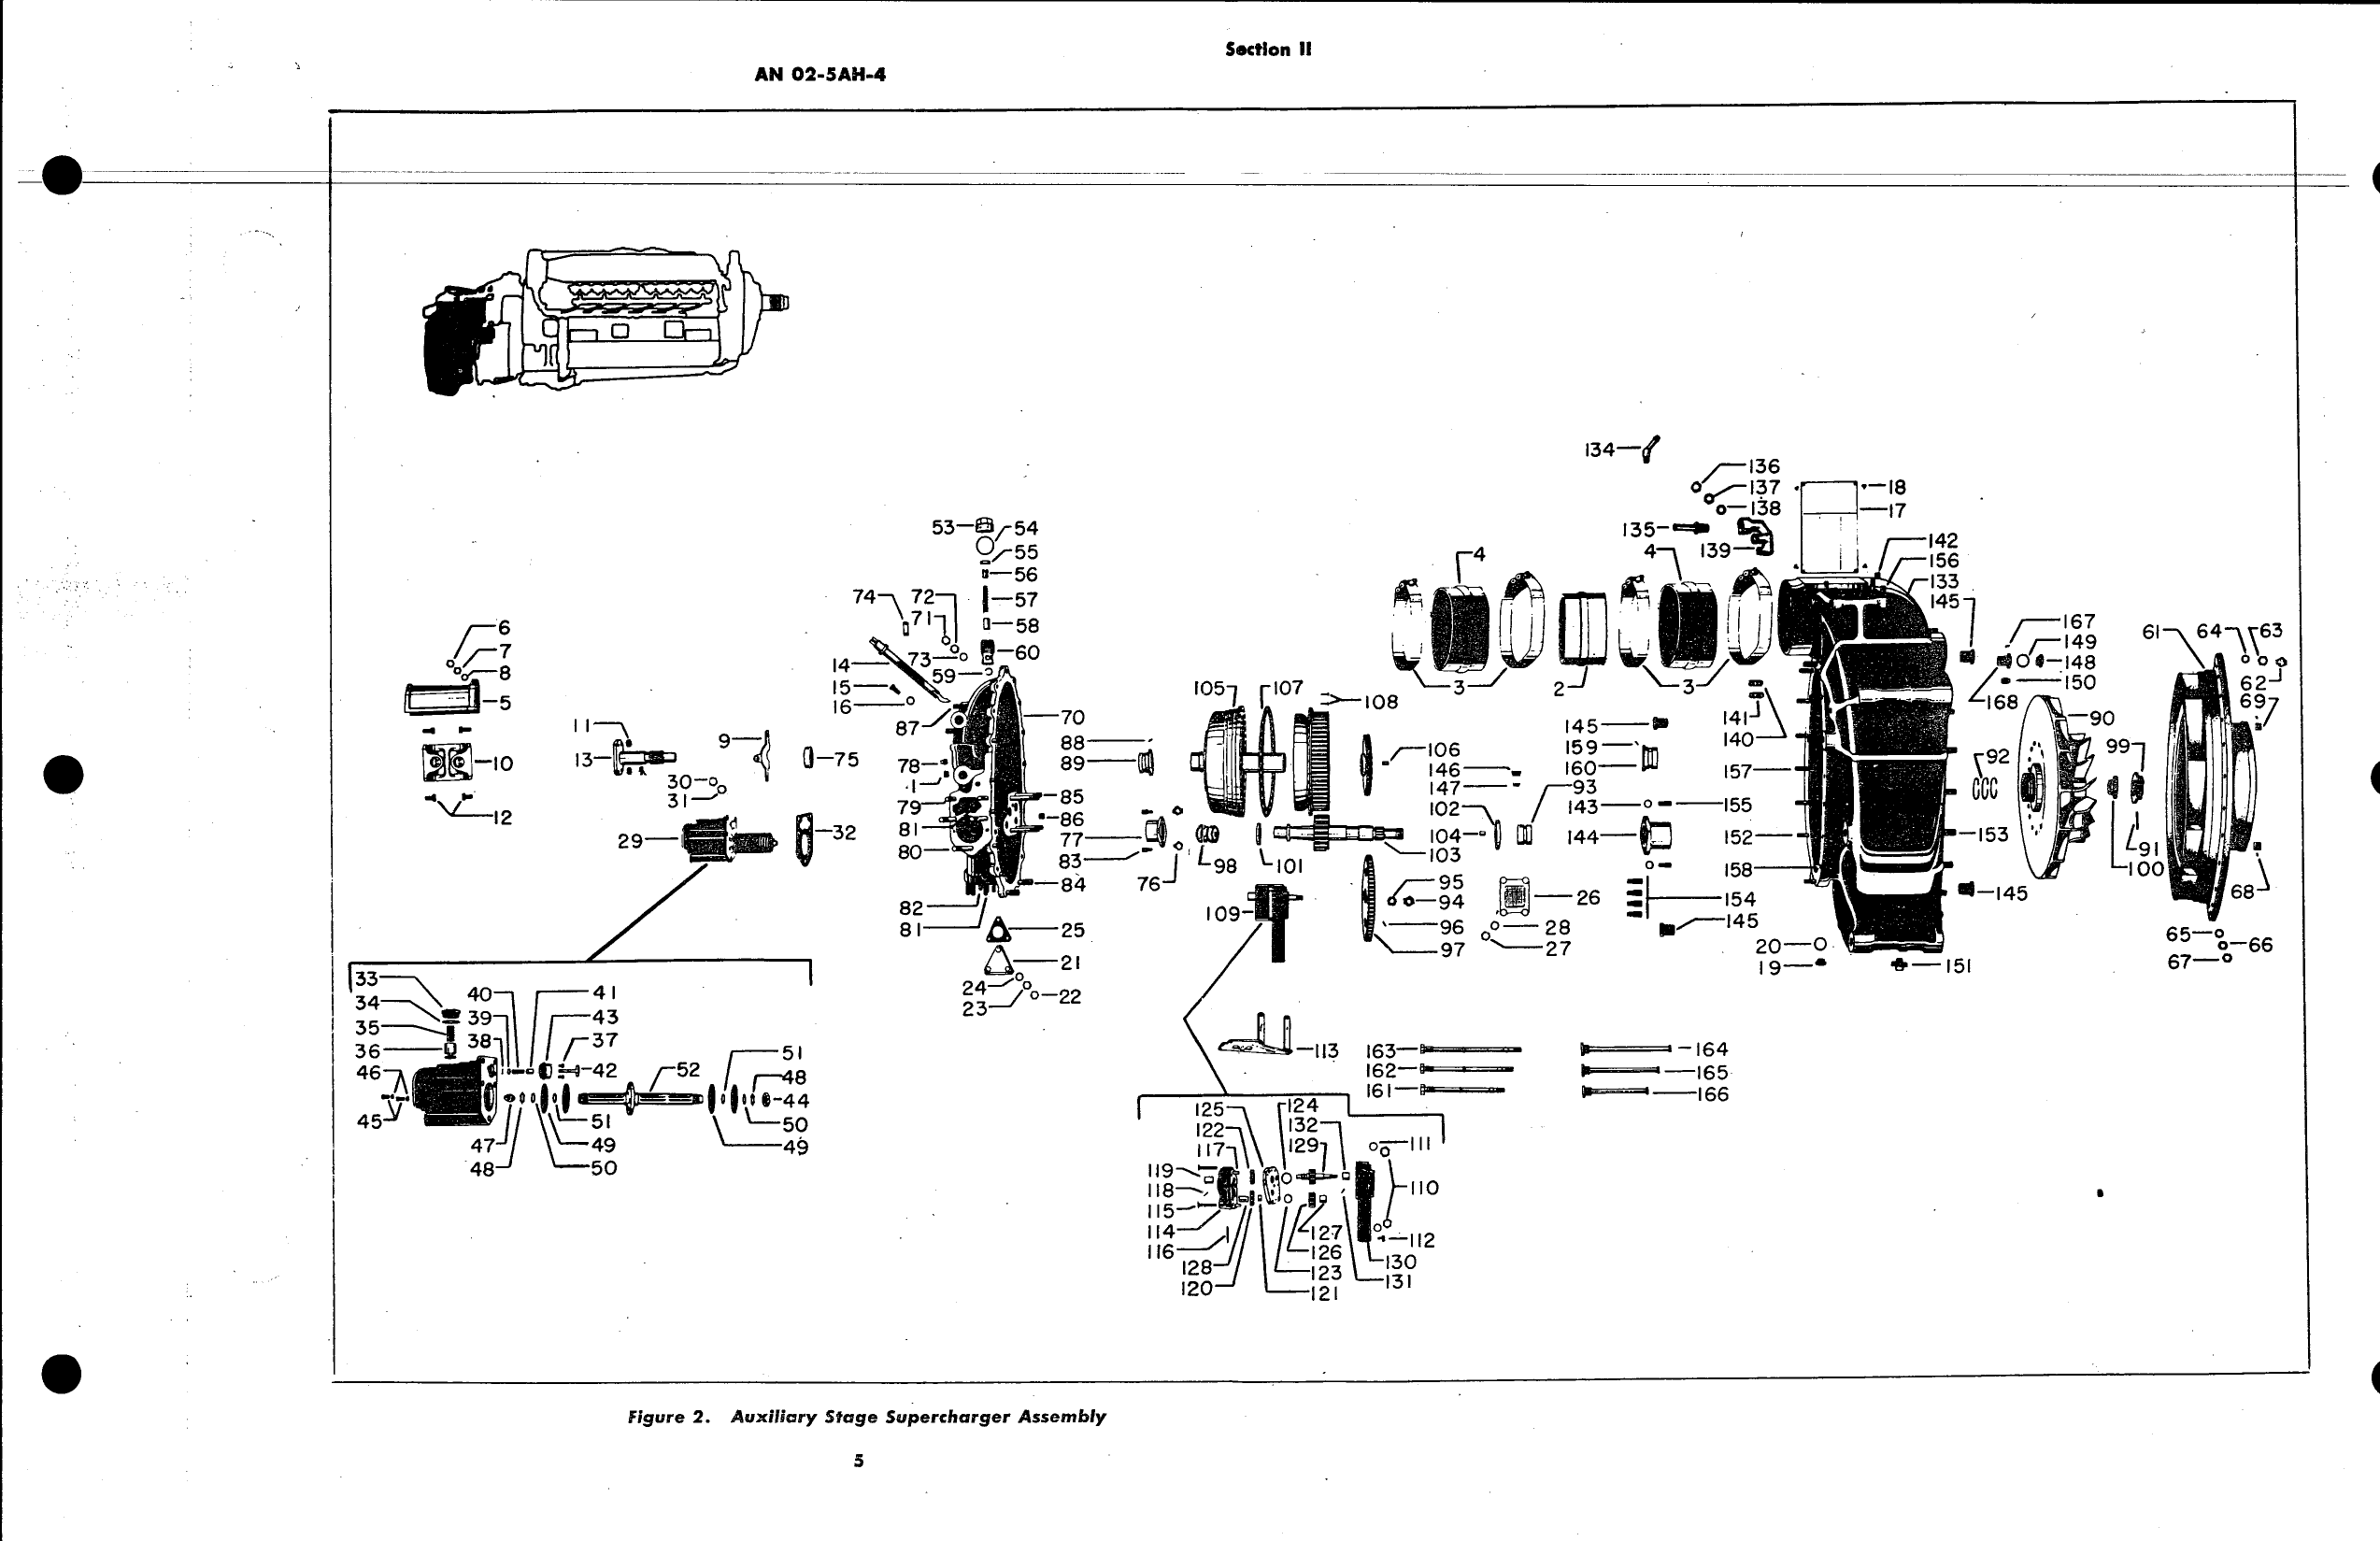 Sample page 13 from AirCorps Library document: Parts Catalog for Models V-1710-143 and -145 Aircraft Engines